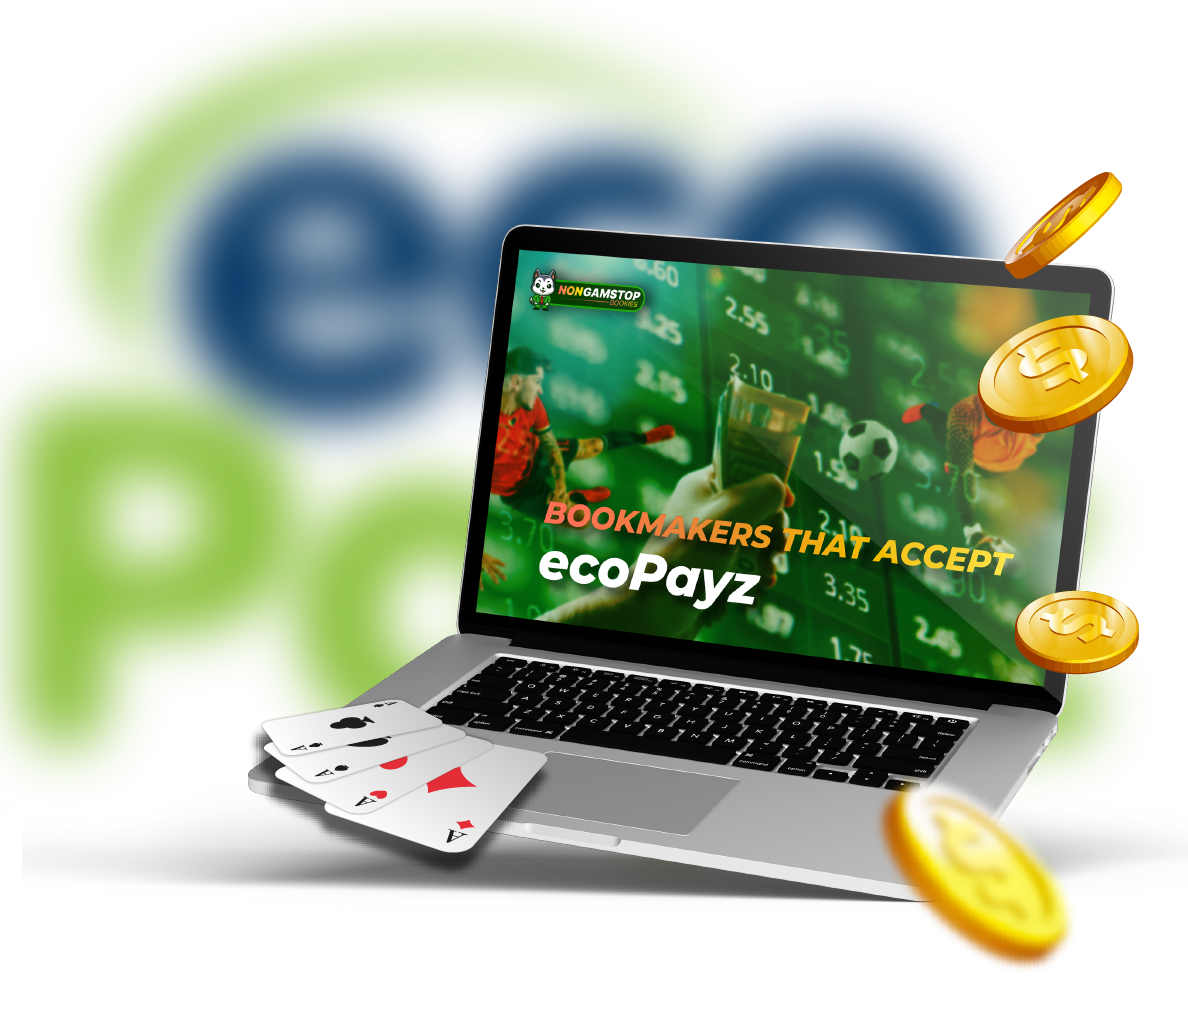 Bookmakers that accept ecoPayz